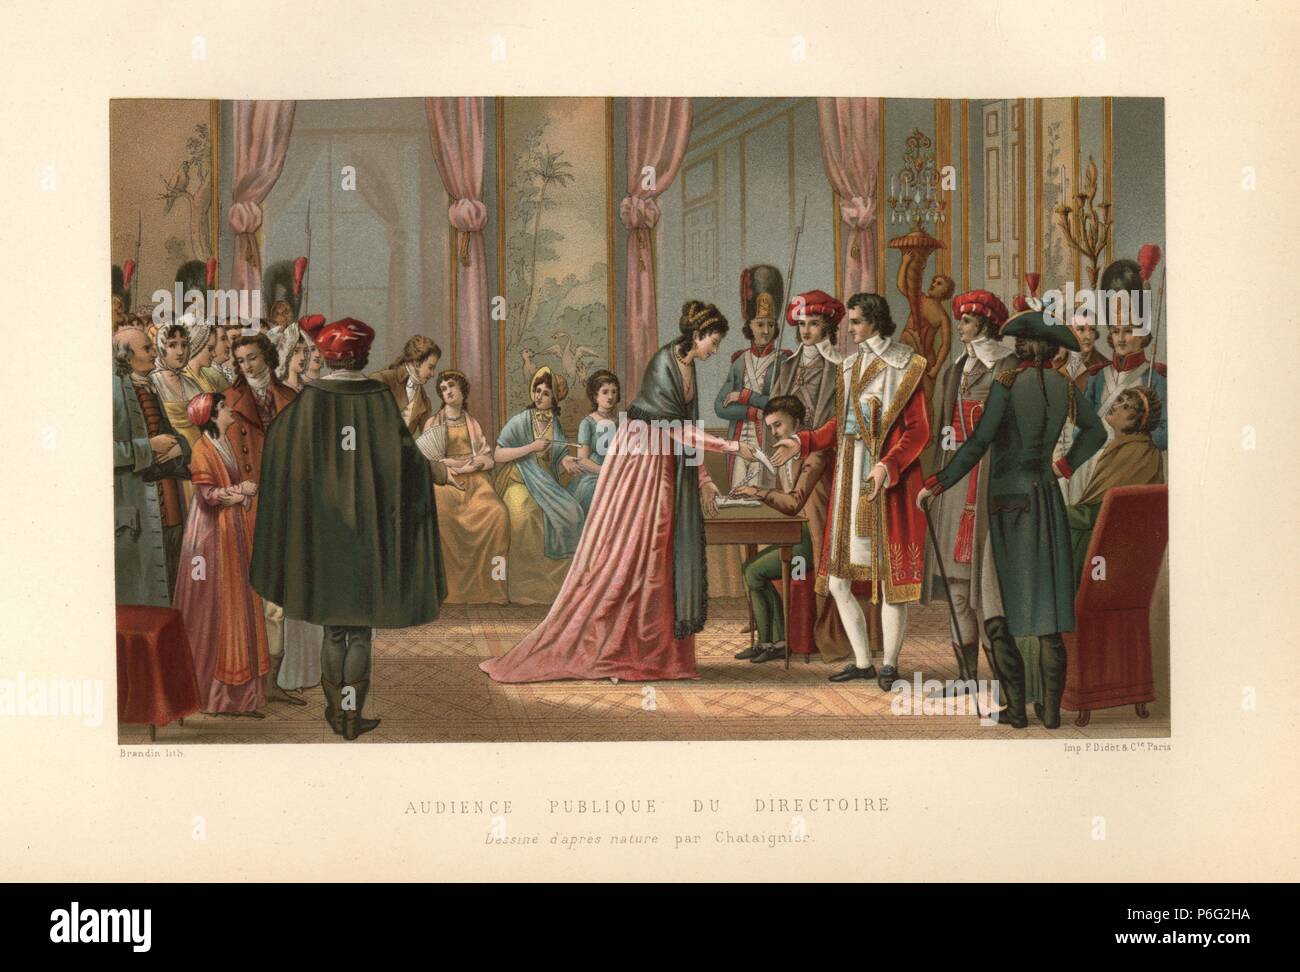 Public audience with the Directoire, Paris, 1800. A woman presents a letter to a secretary and other officials of the Directory while soldiers and citizens watch. Illustration drawn by Chataignier, chromolithograph by Brandin from Paul Lacroix's 'Directoire, Consulat et Empire,' Paris, 1884. Stock Photo